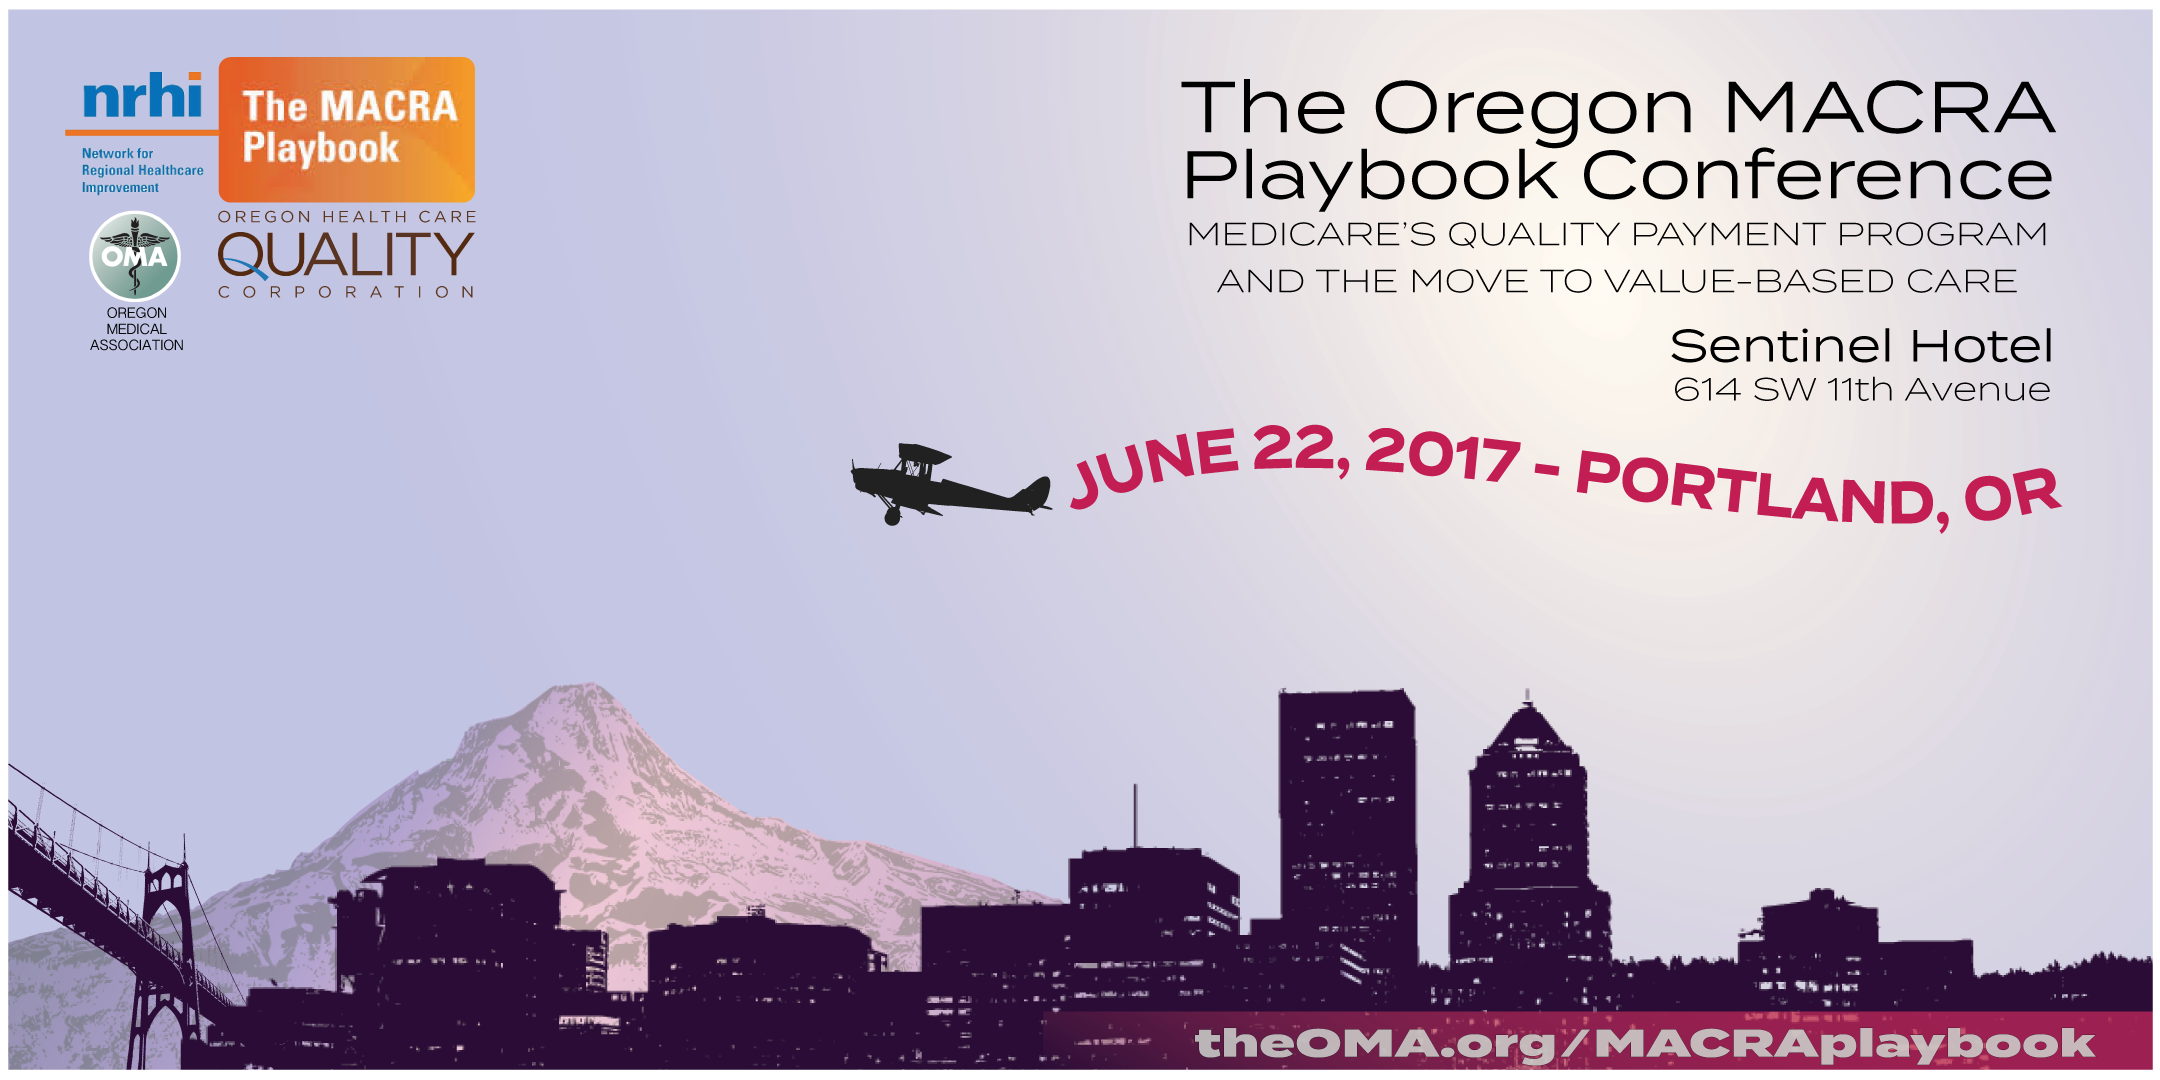 MACRA Playbook Conference